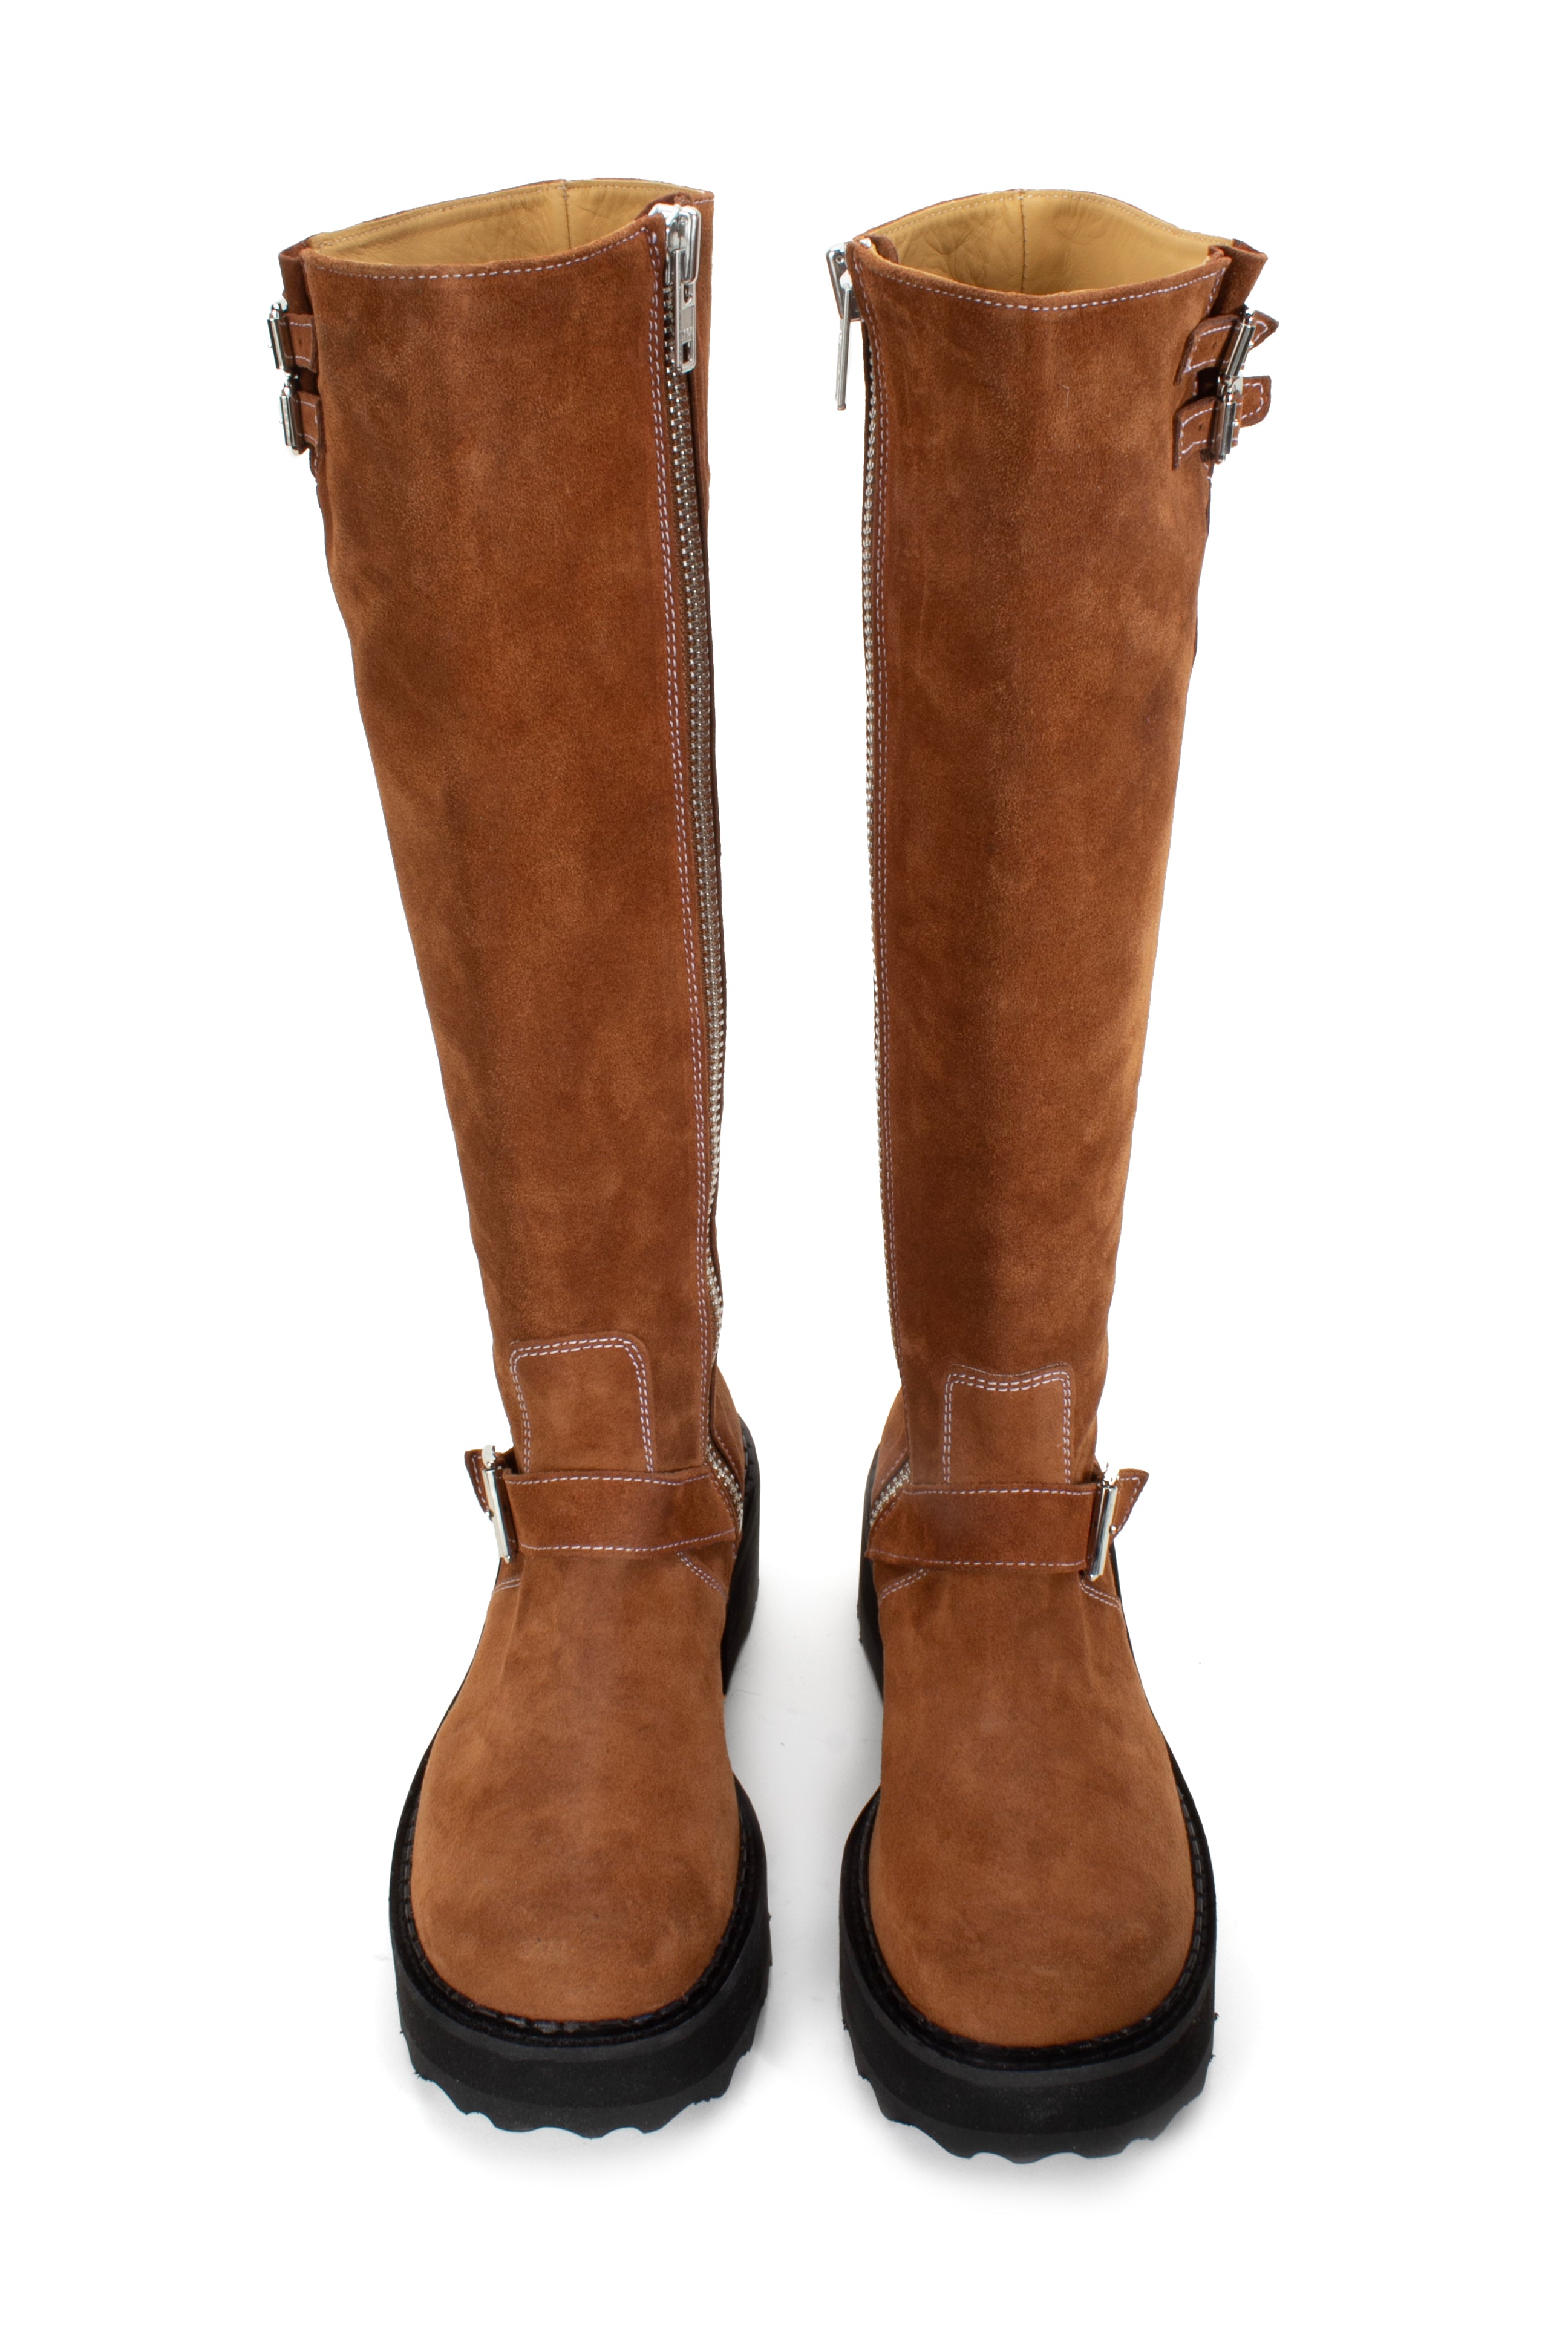 Boot in brown is an under-the-knee-high, suede boot with a leather top sole and a heel height of 1.5". 